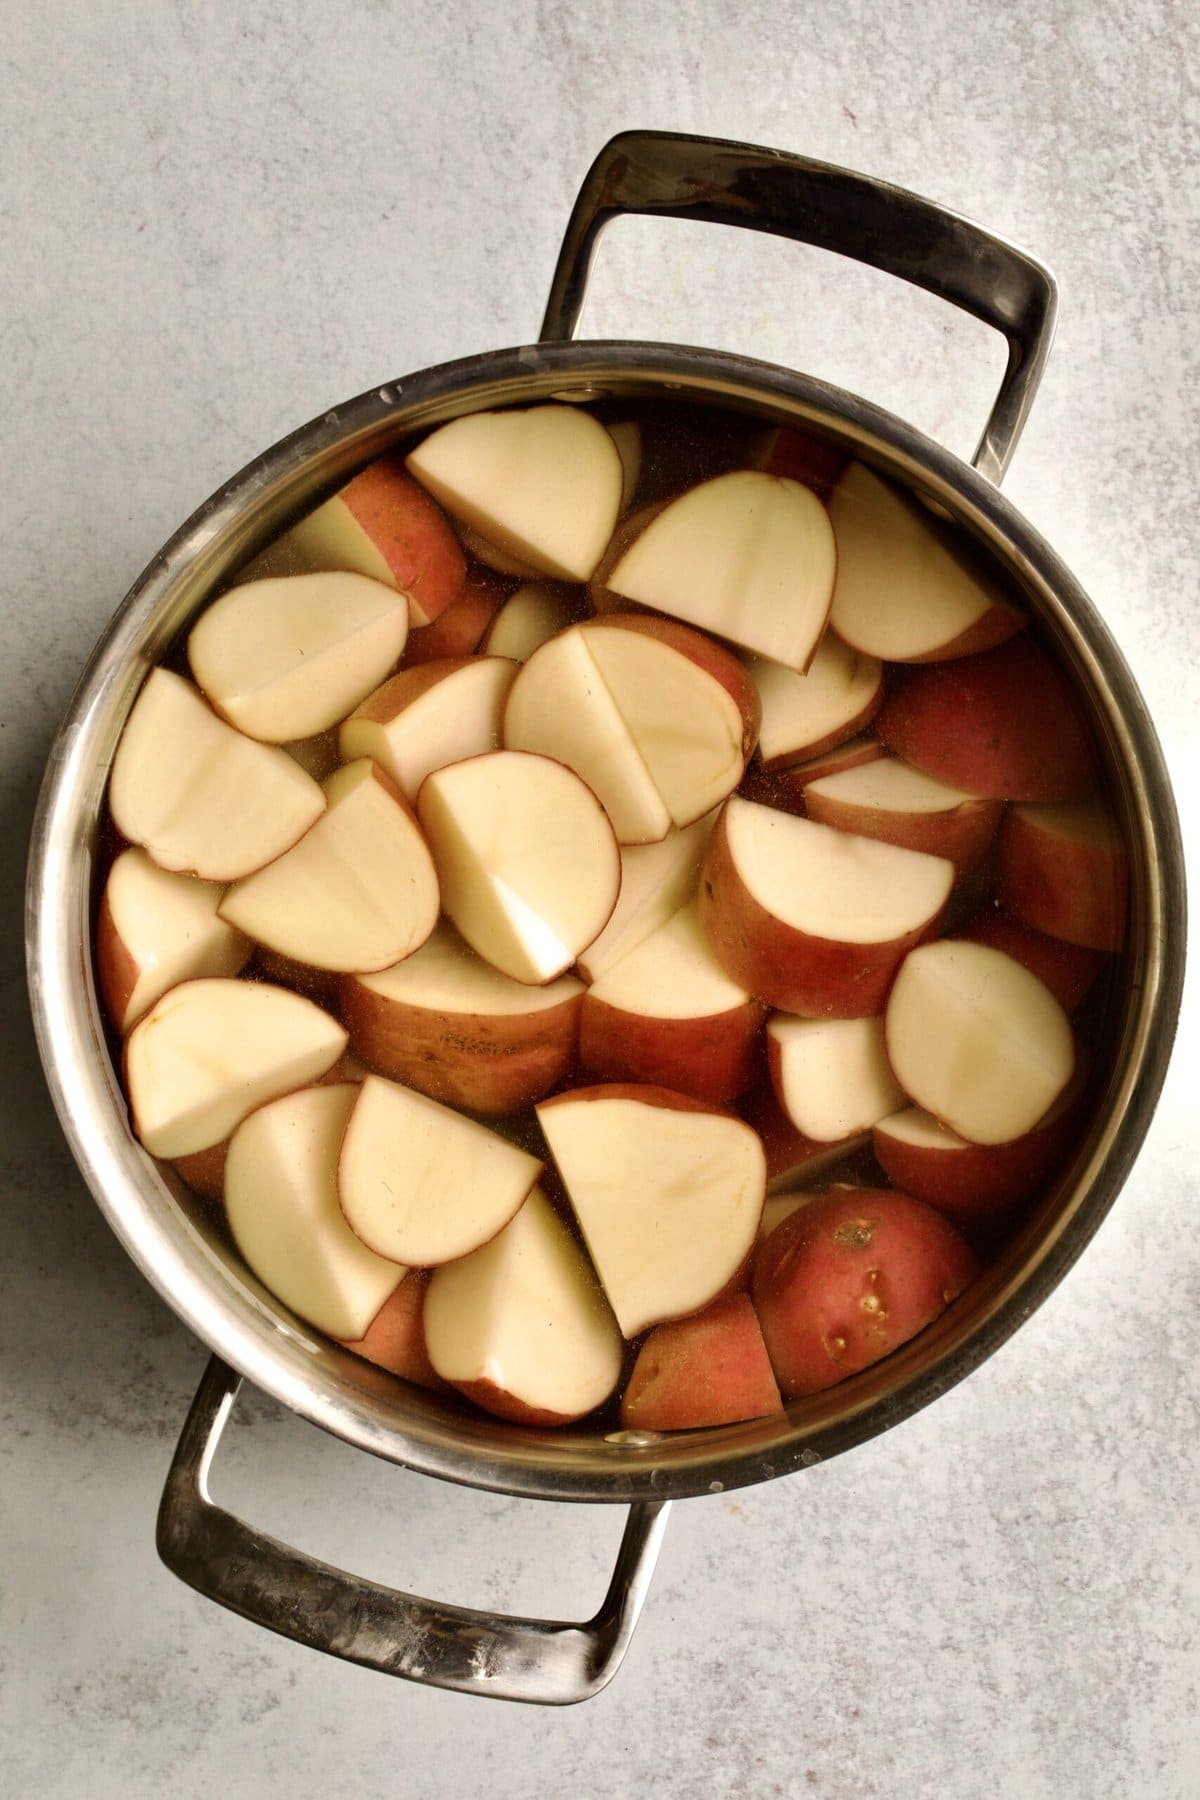 process for making redskin mashed potatoes- boiling potatoes